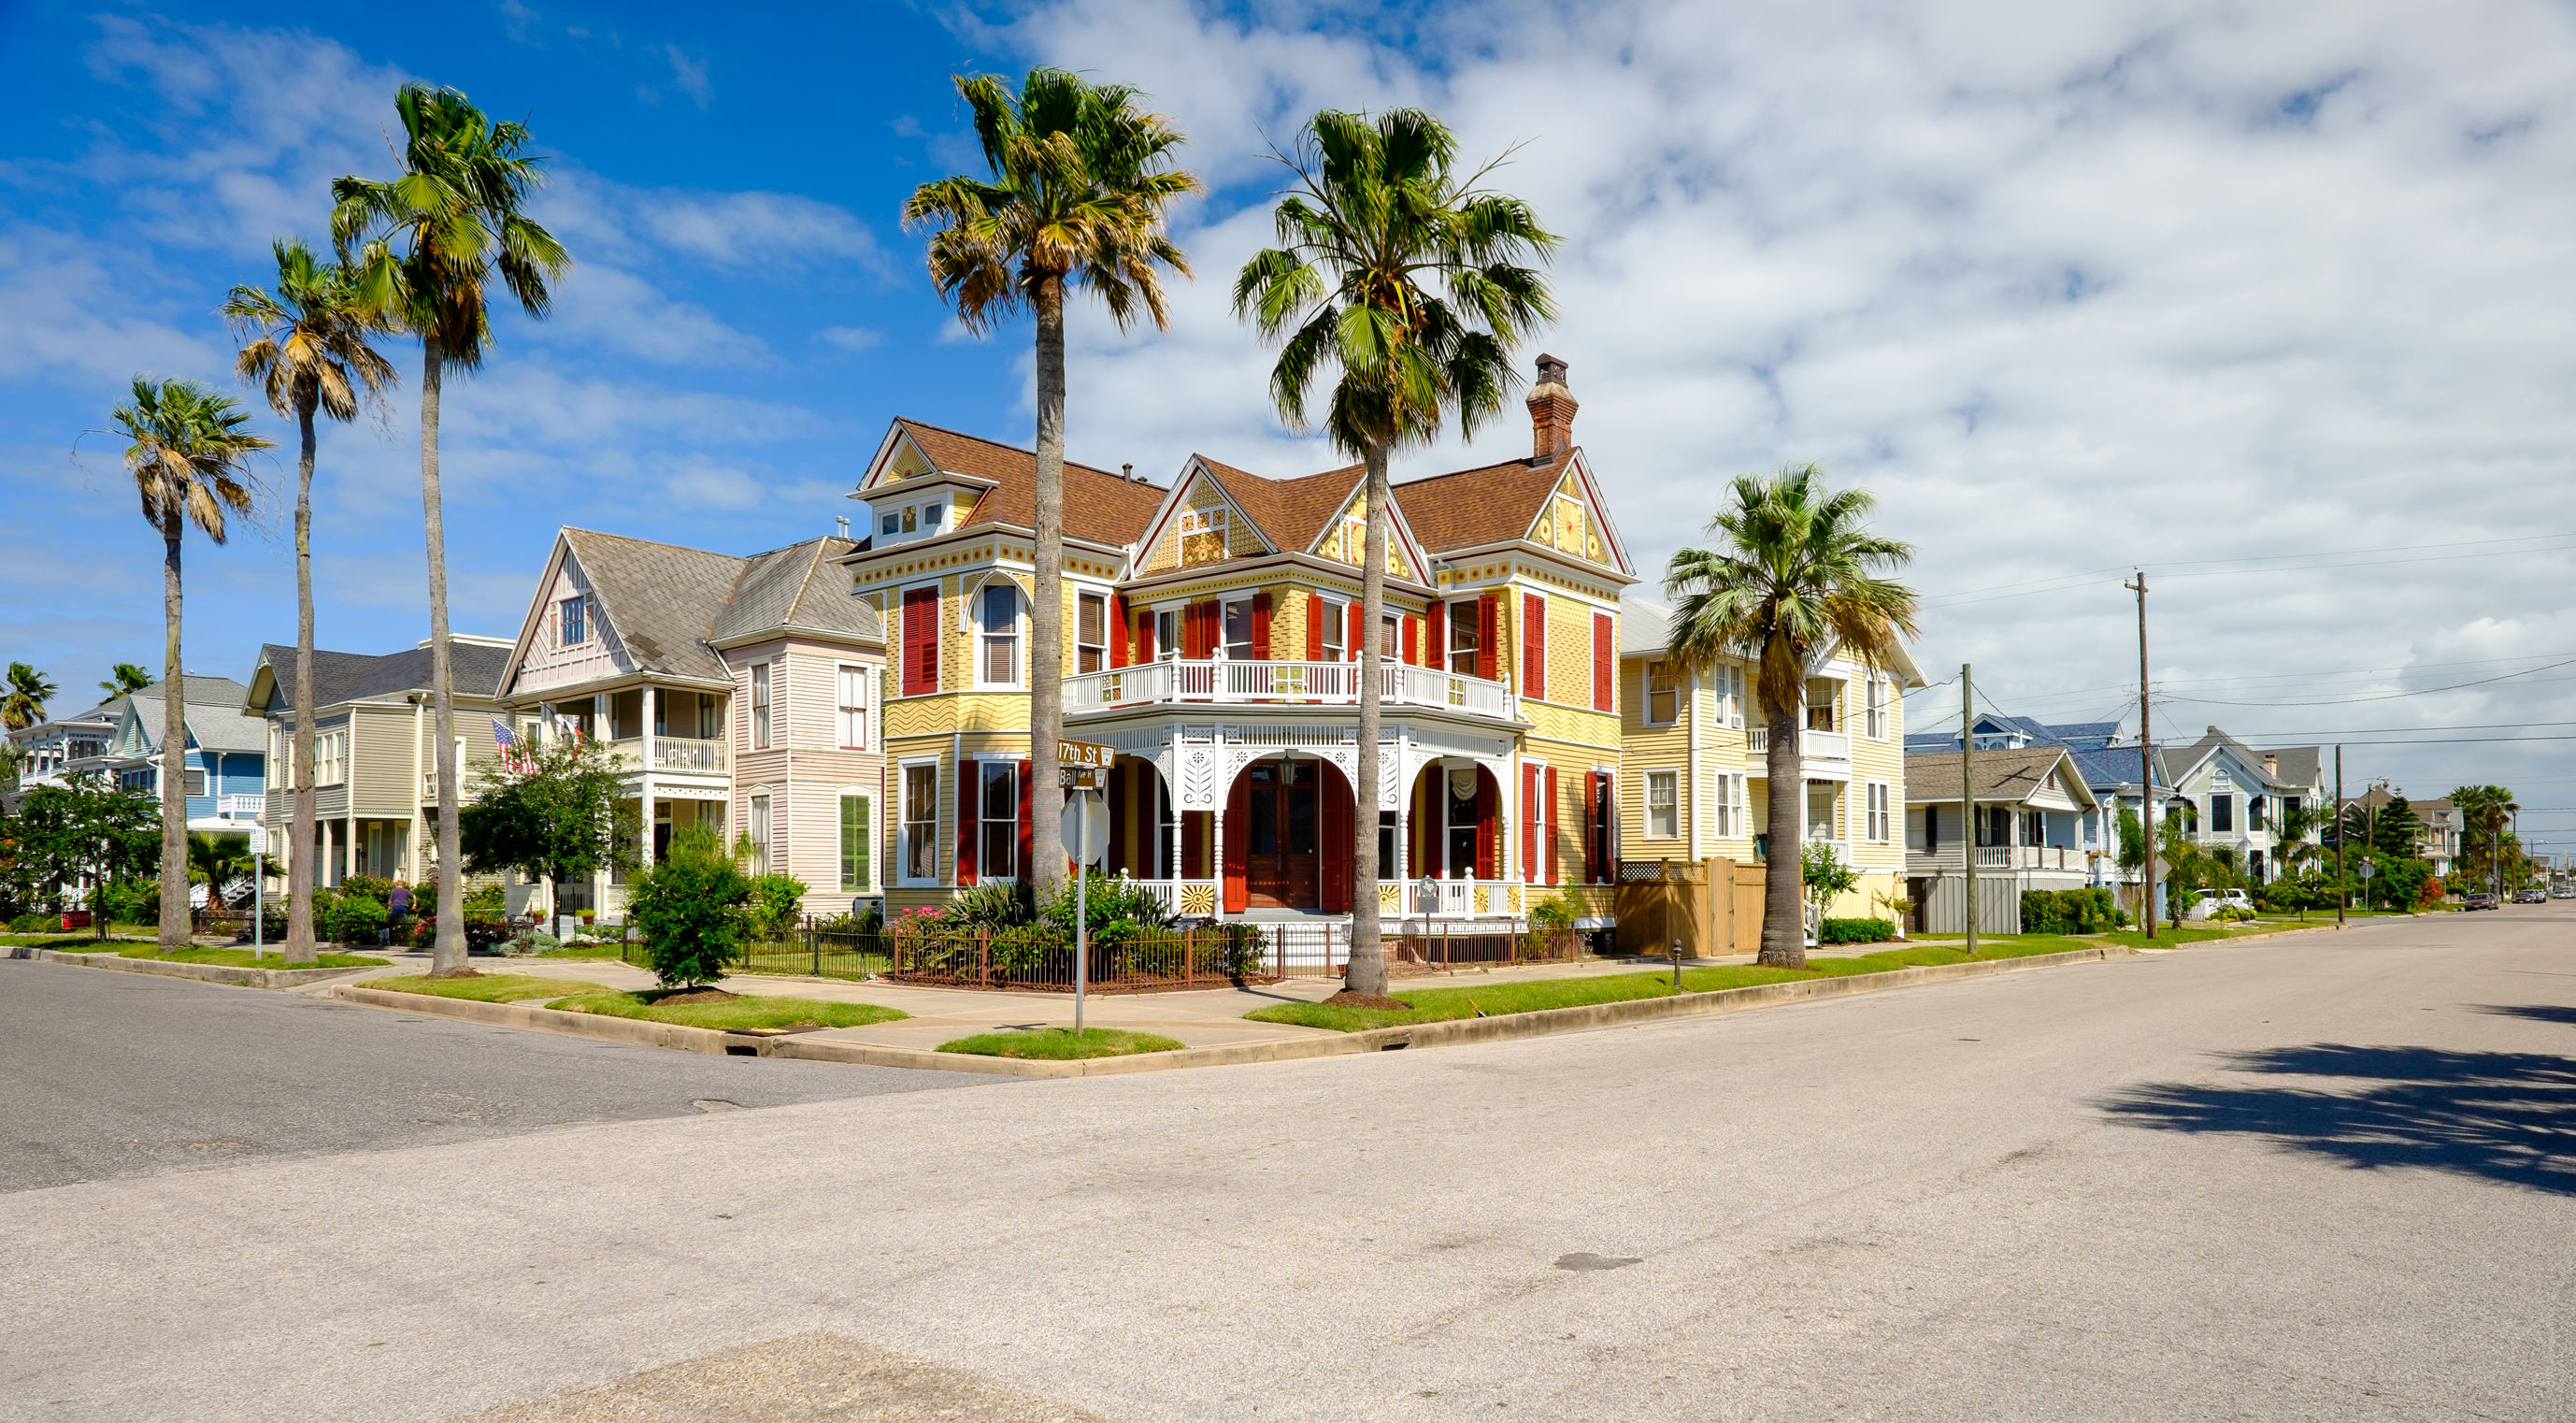 eautiful vintage homes of the historical district in galveston, texas.